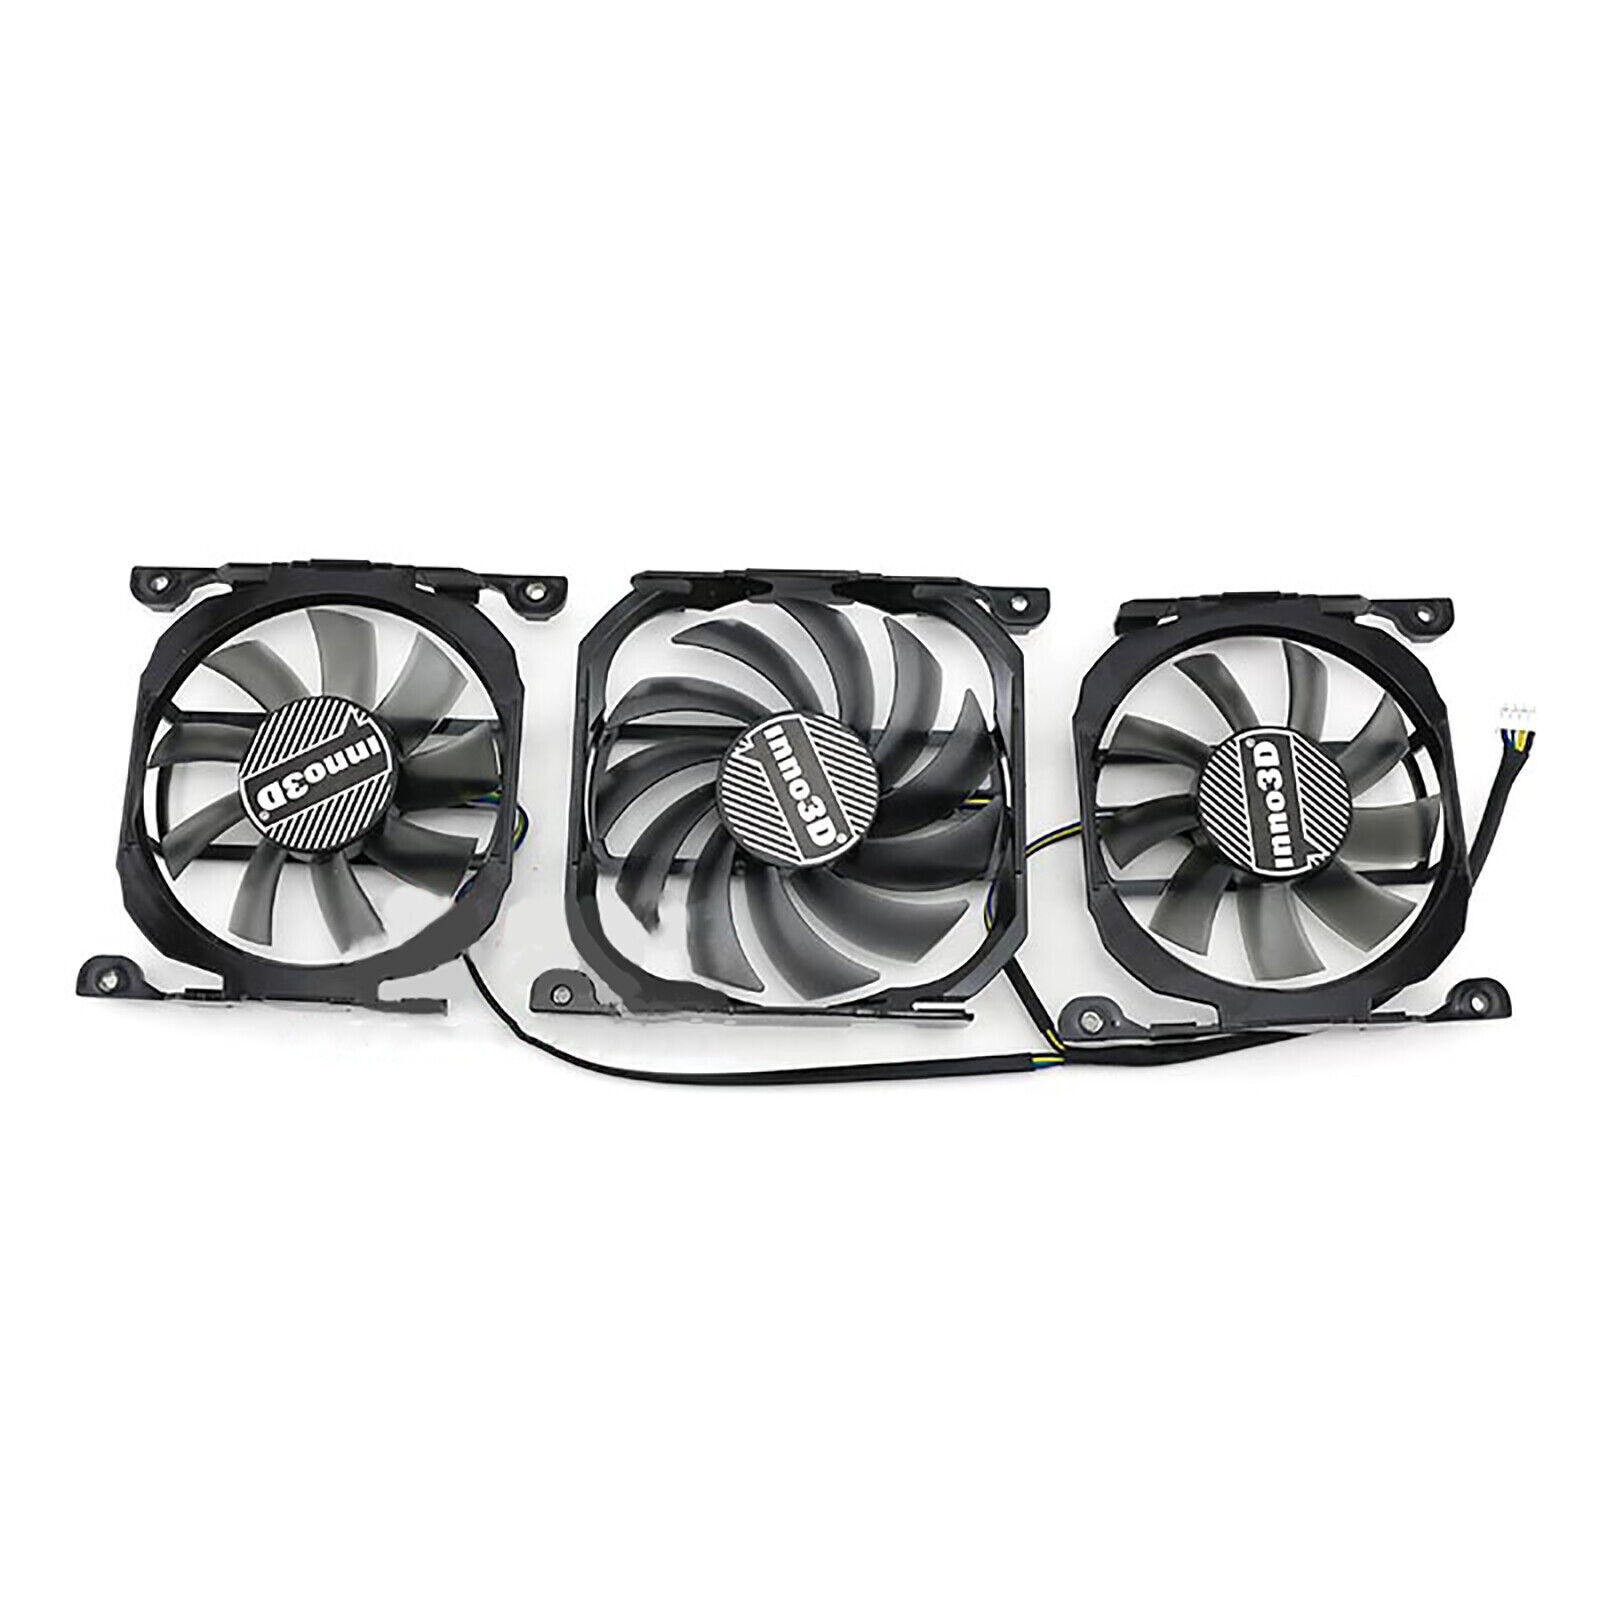 Graphics Card Cooling Fan for Yeston R9 290 R9 280X Game Master Video Card VER